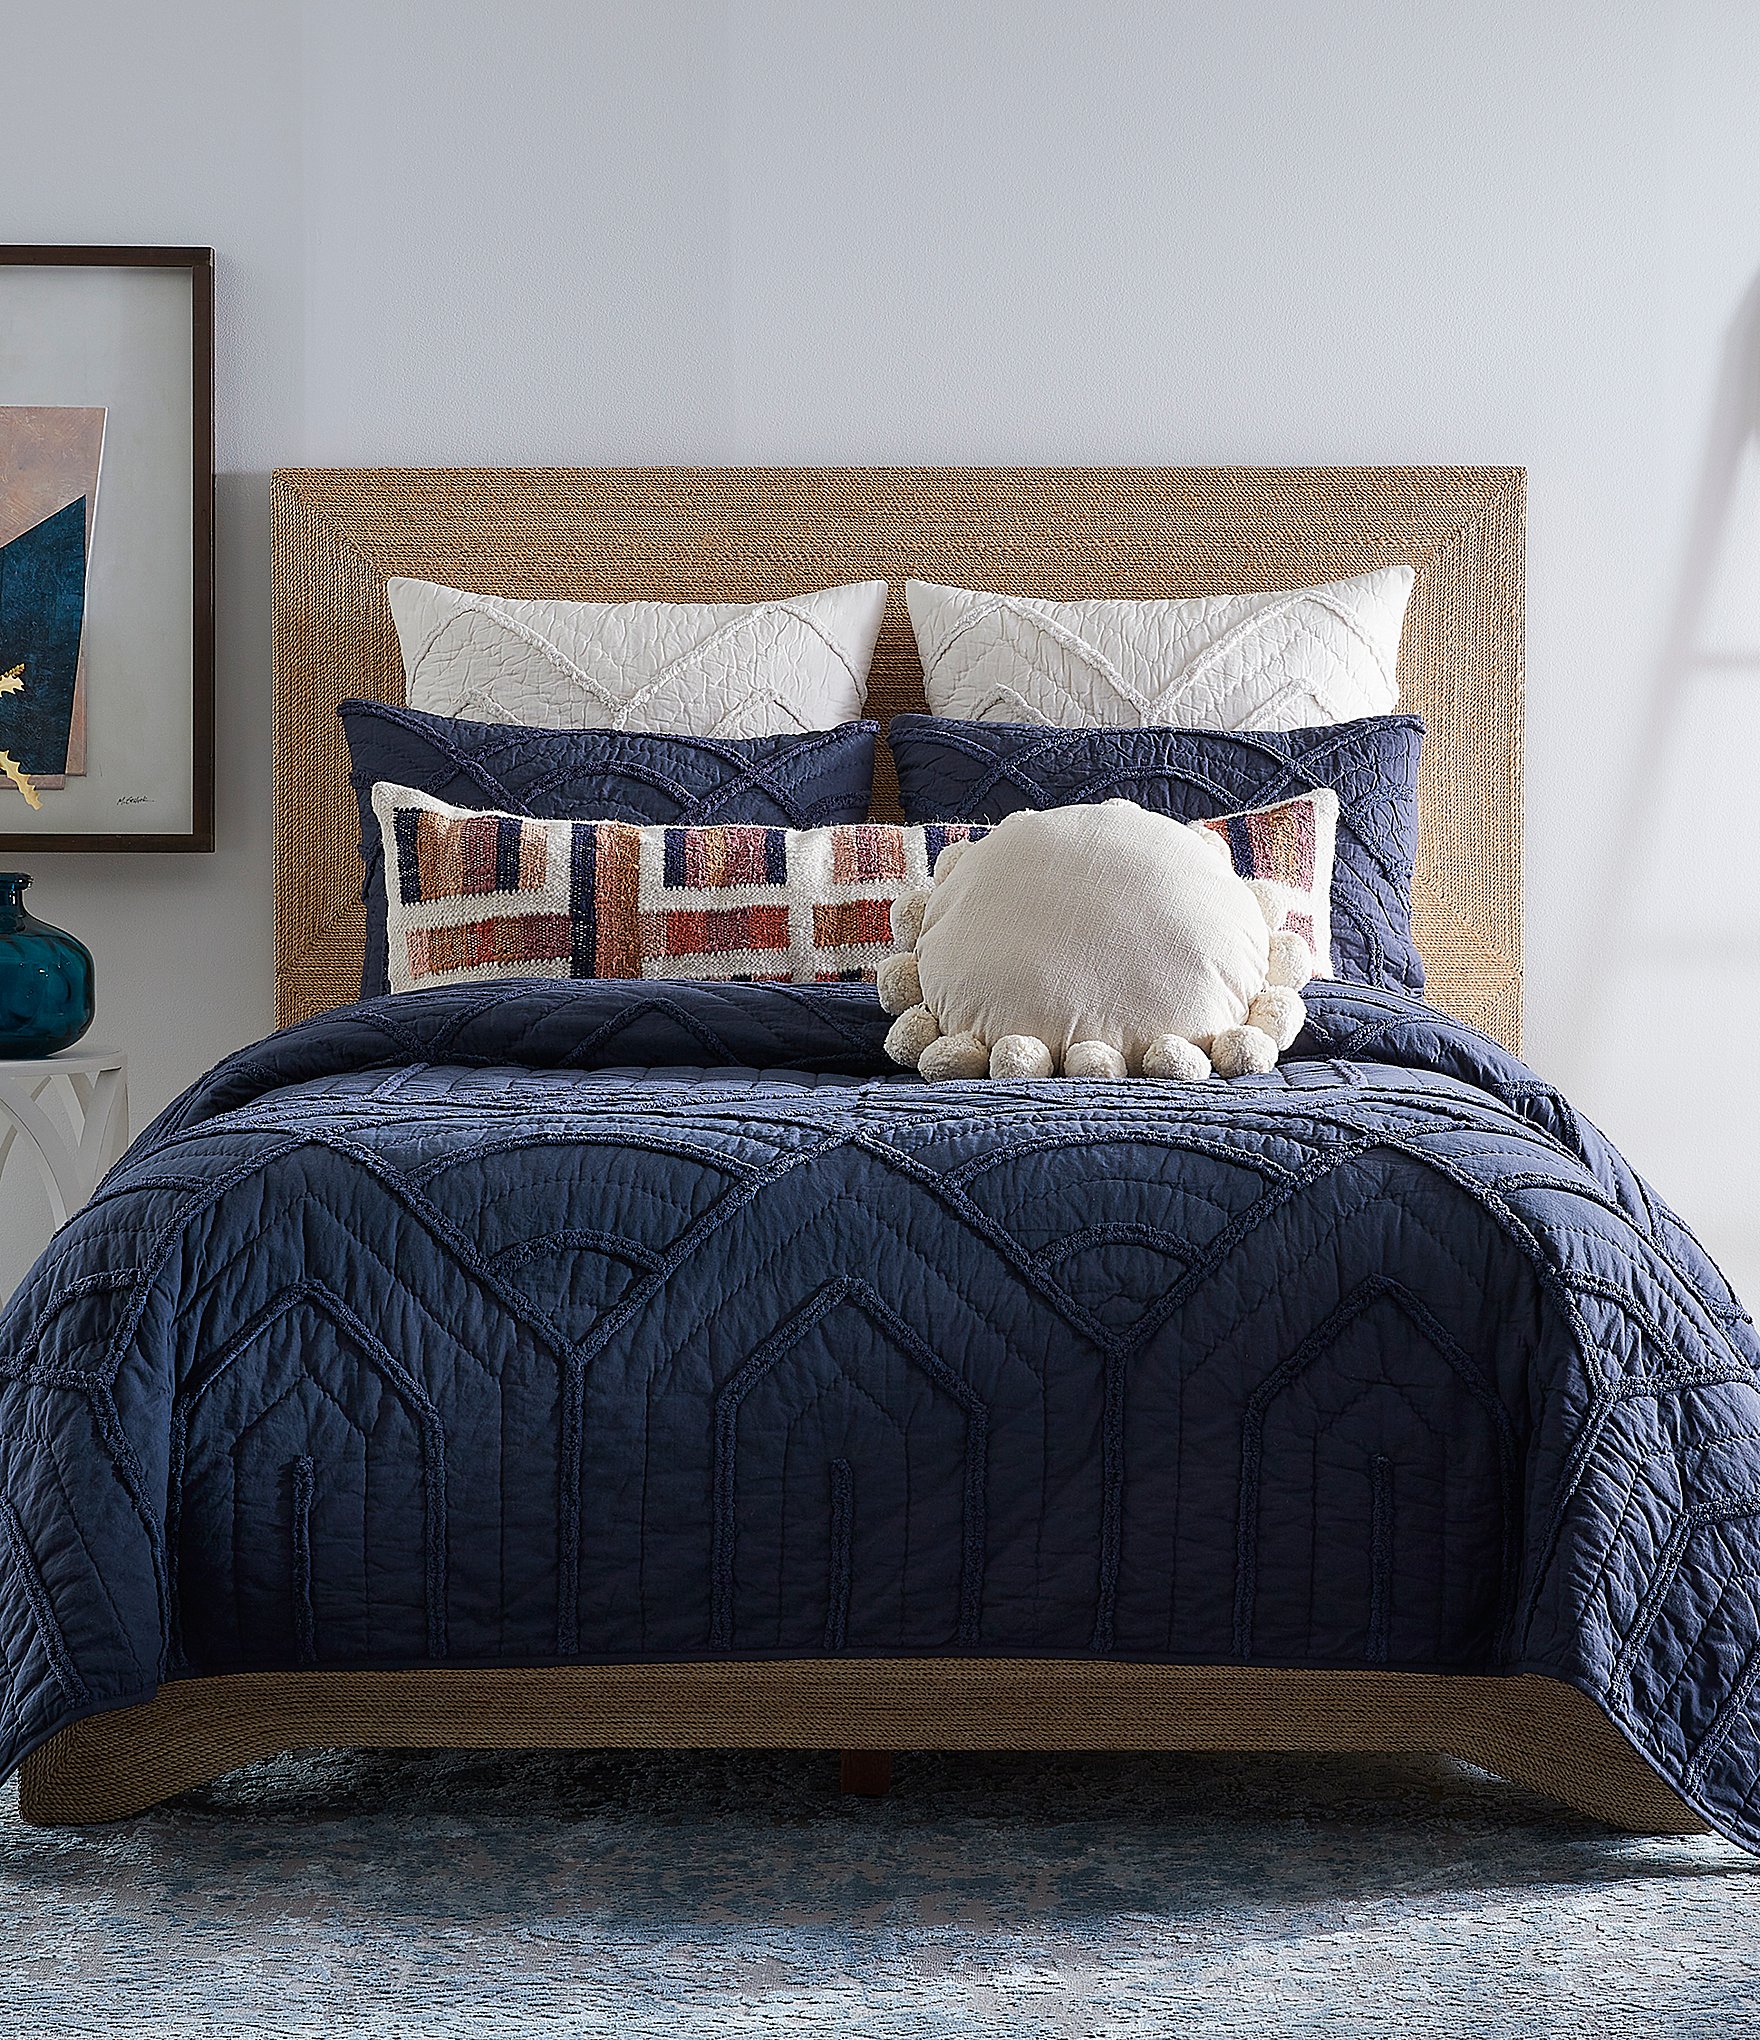 twin comforters: Bedding & Bedding Collections